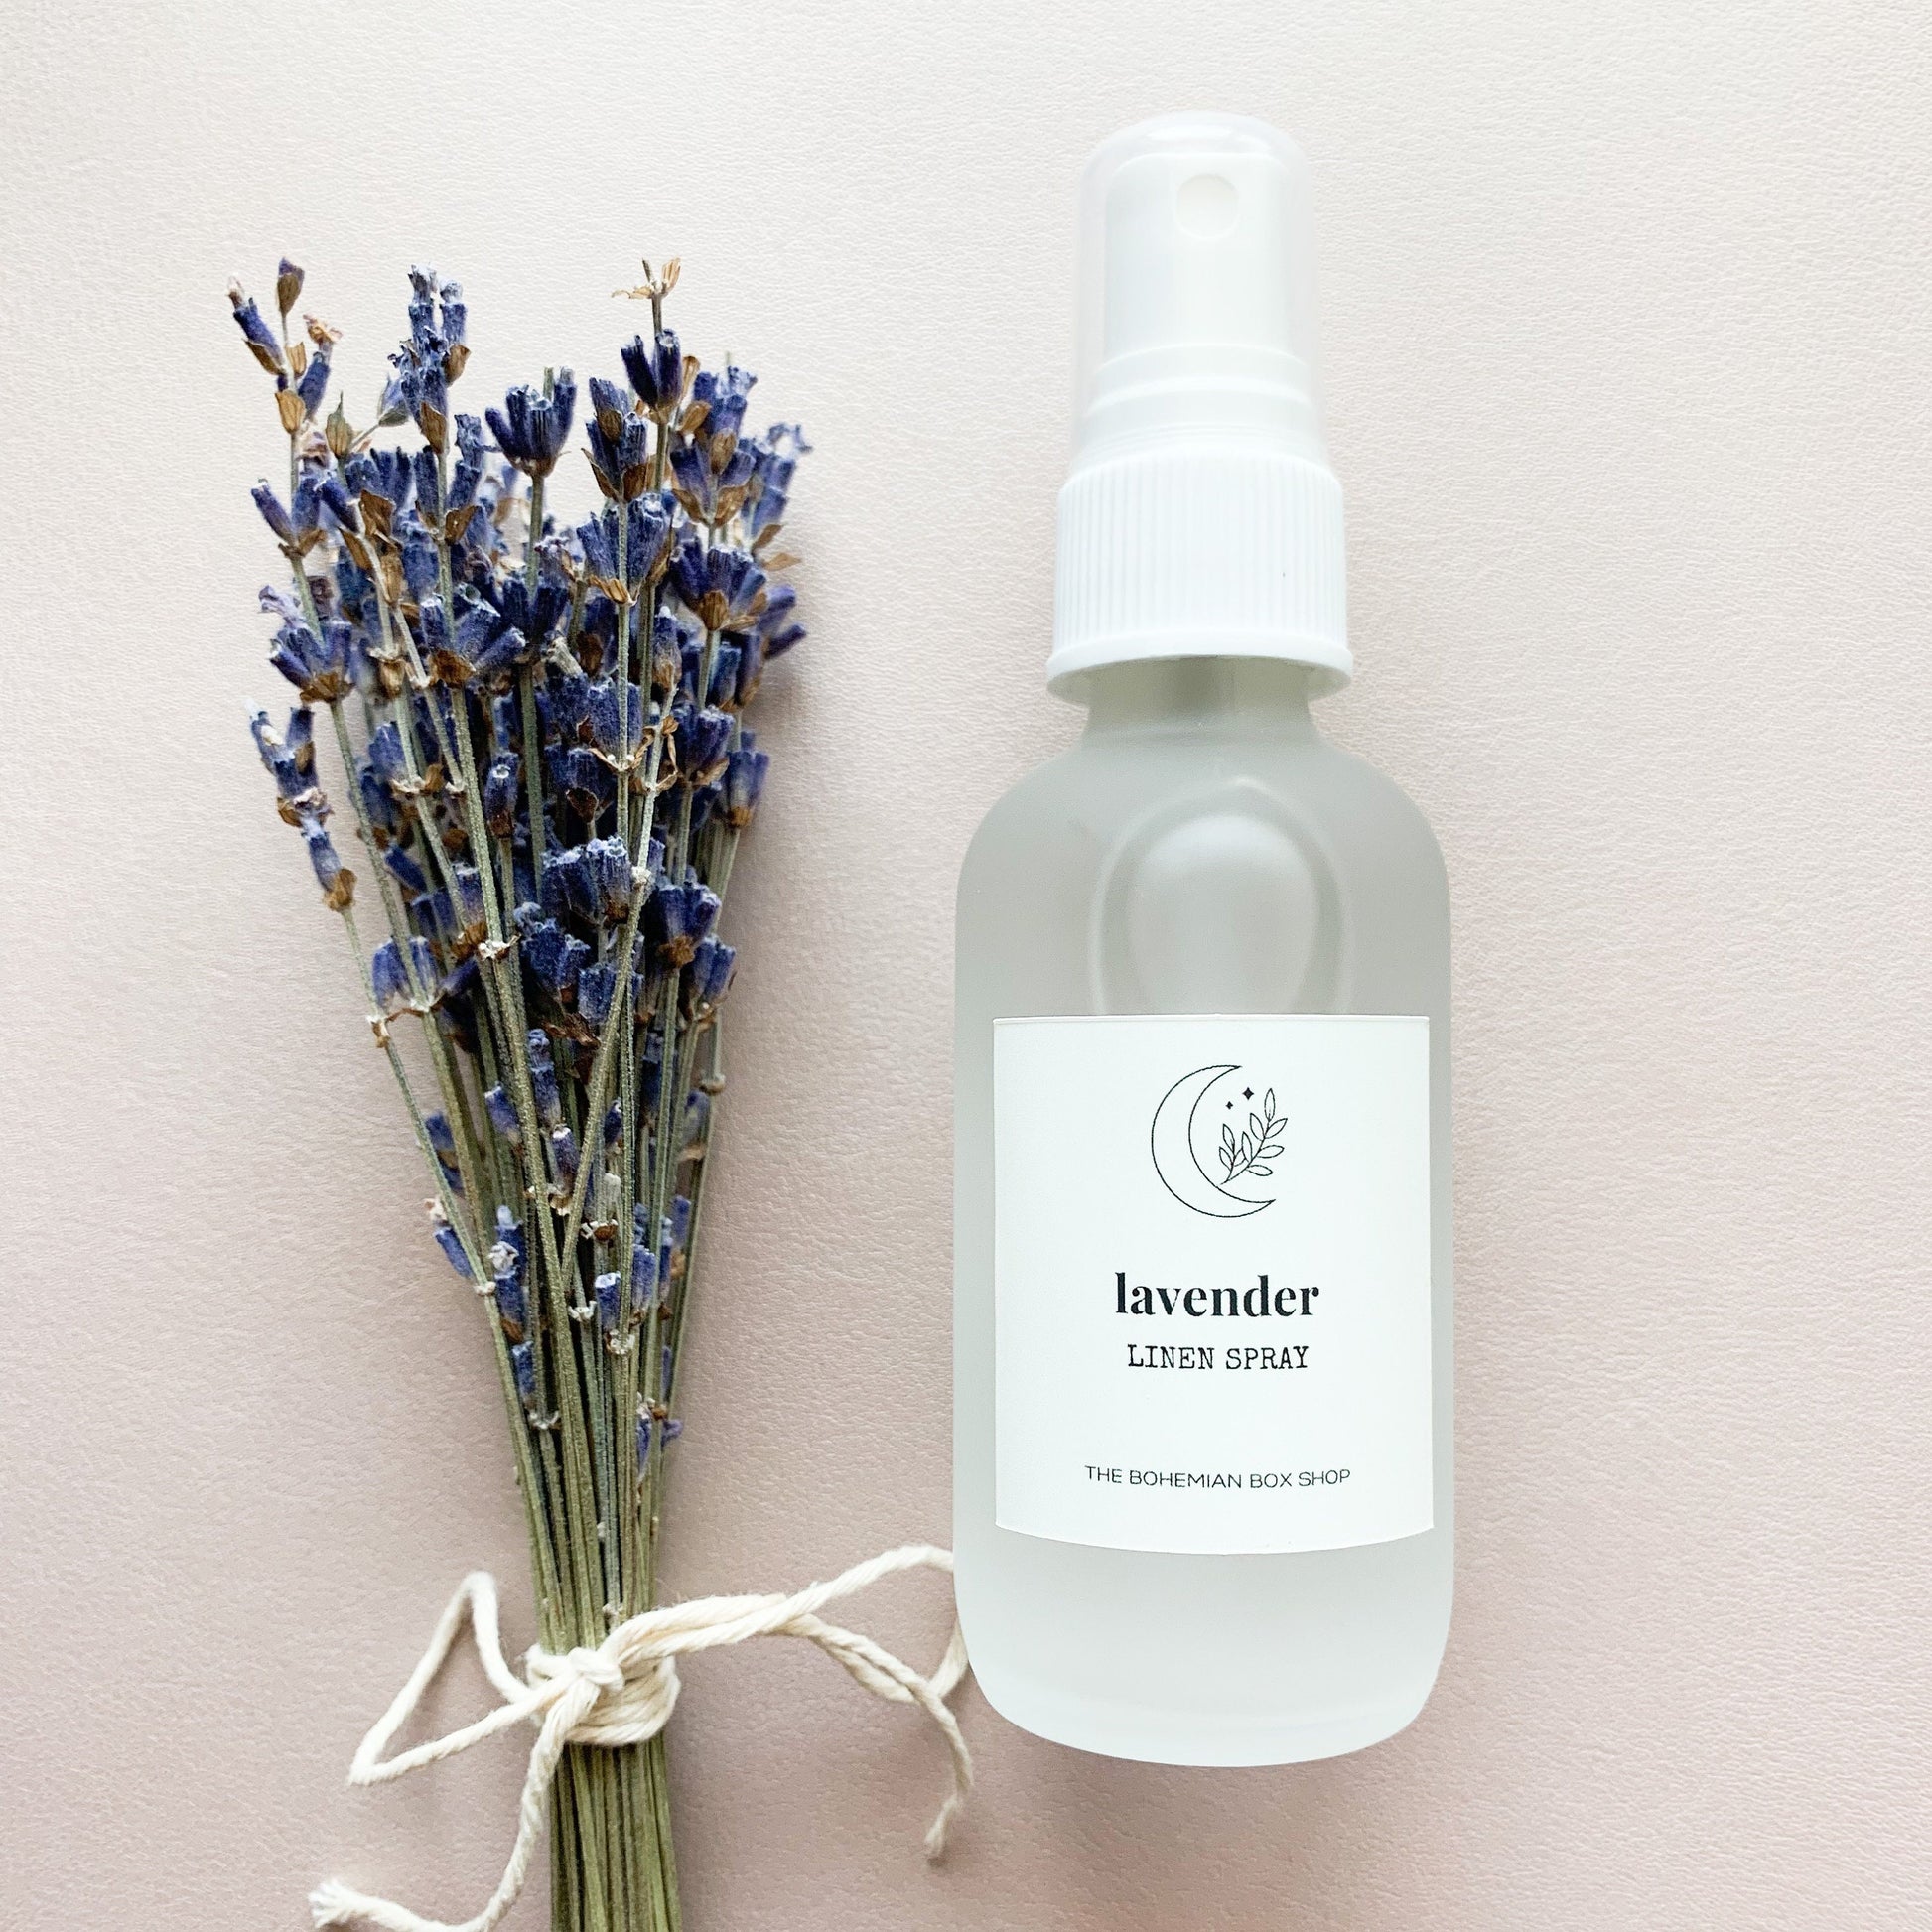 2oz lavender linen spray in a frosted spray bottle